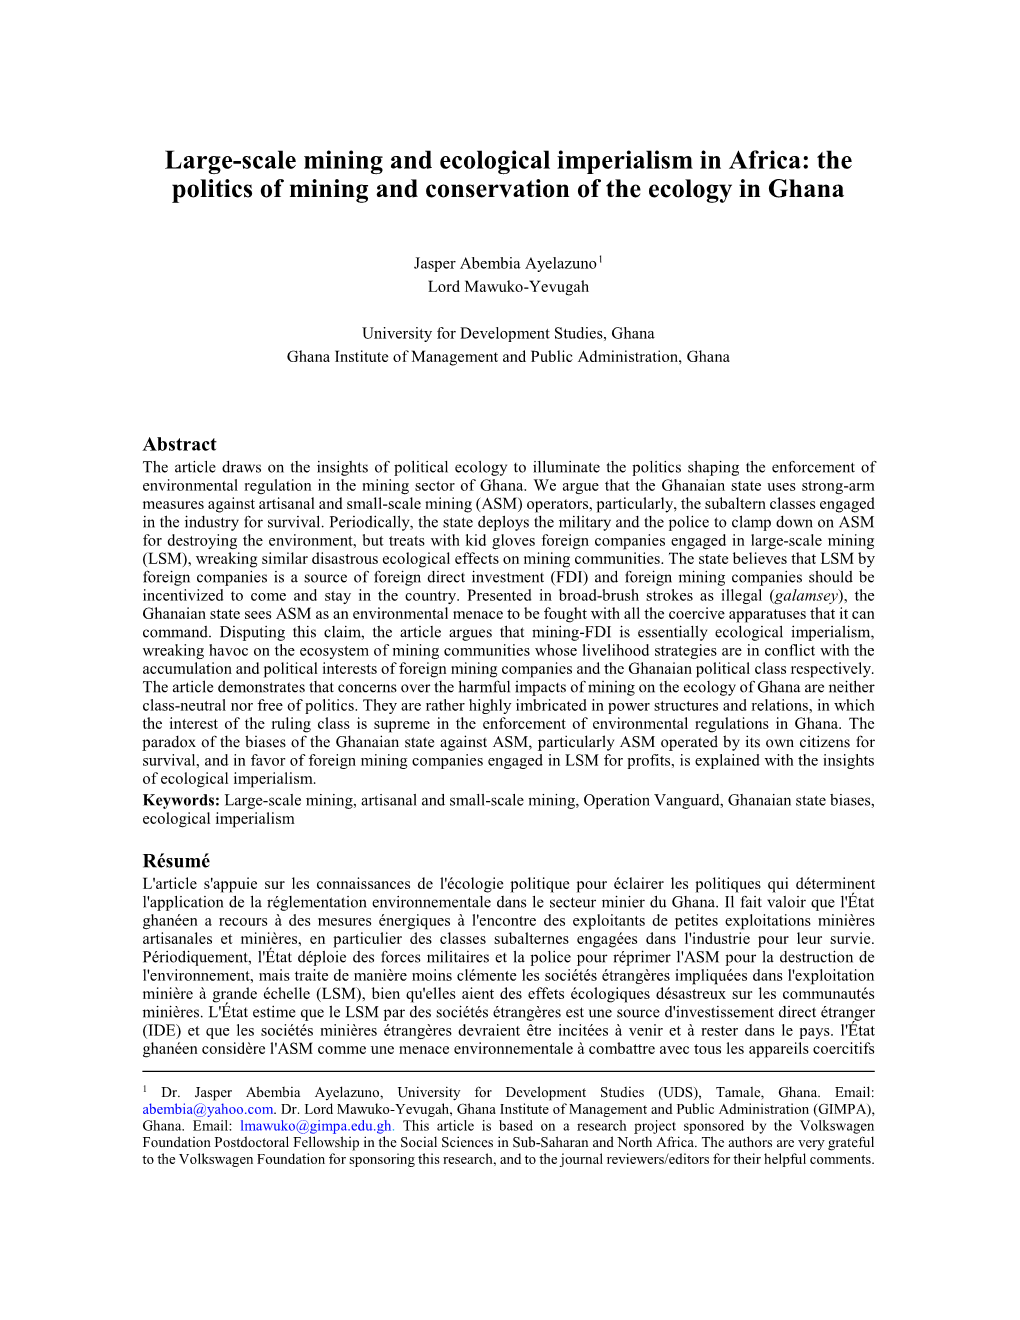 Large-Scale Mining and Ecological Imperialism in Africa: the Politics of Mining and Conservation of the Ecology in Ghana